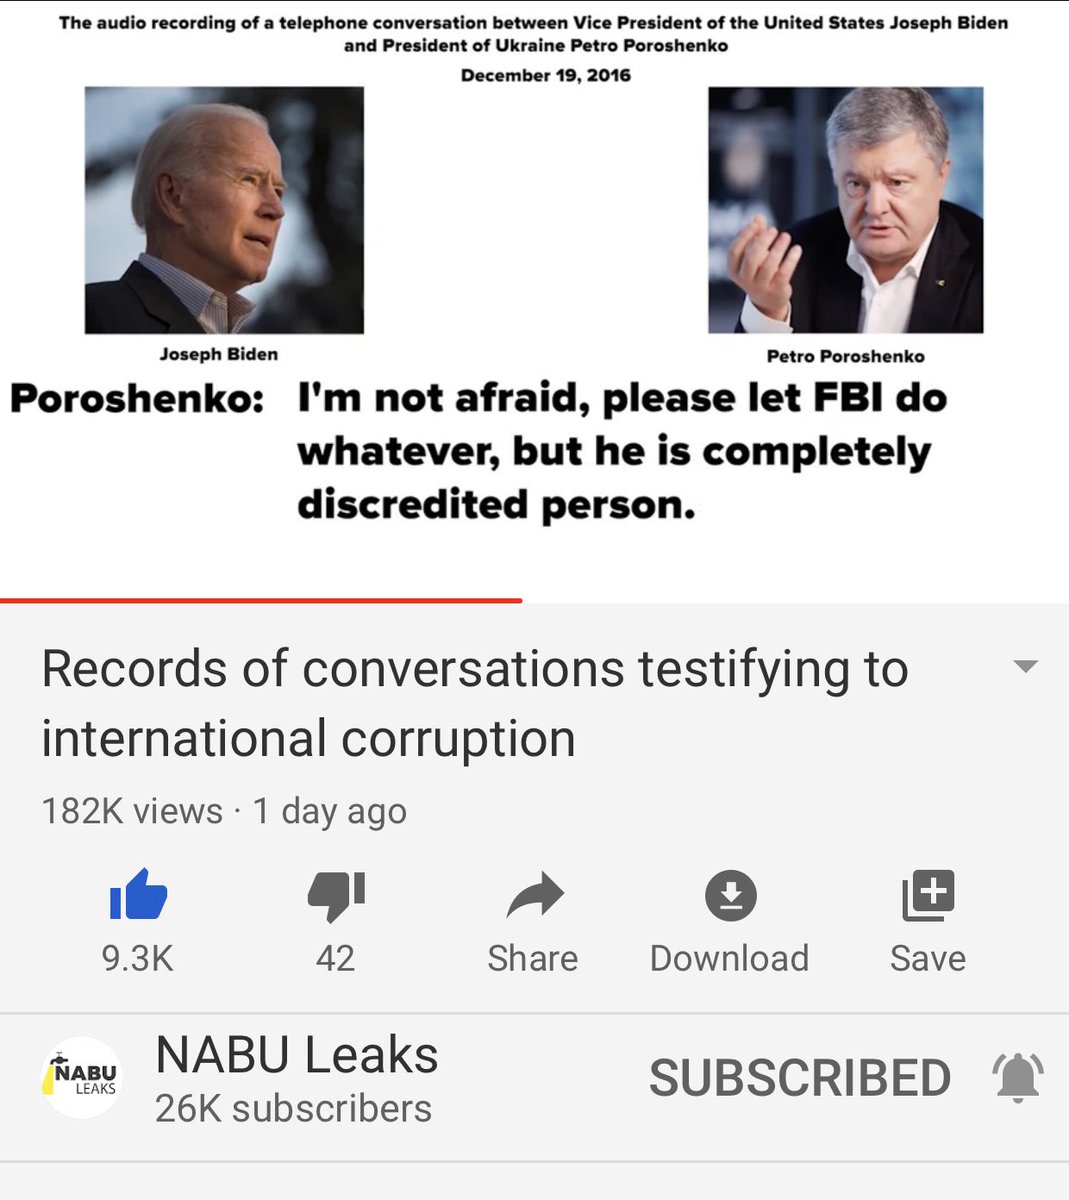 Dec 2026 call cont’d where Poroshenko says let the FBI investigate becuz Onyshchenko is a discredited person but he’s asking Biden for reassurance that the FBI Isn’t investigating. Biden says no but he will double check to be sure